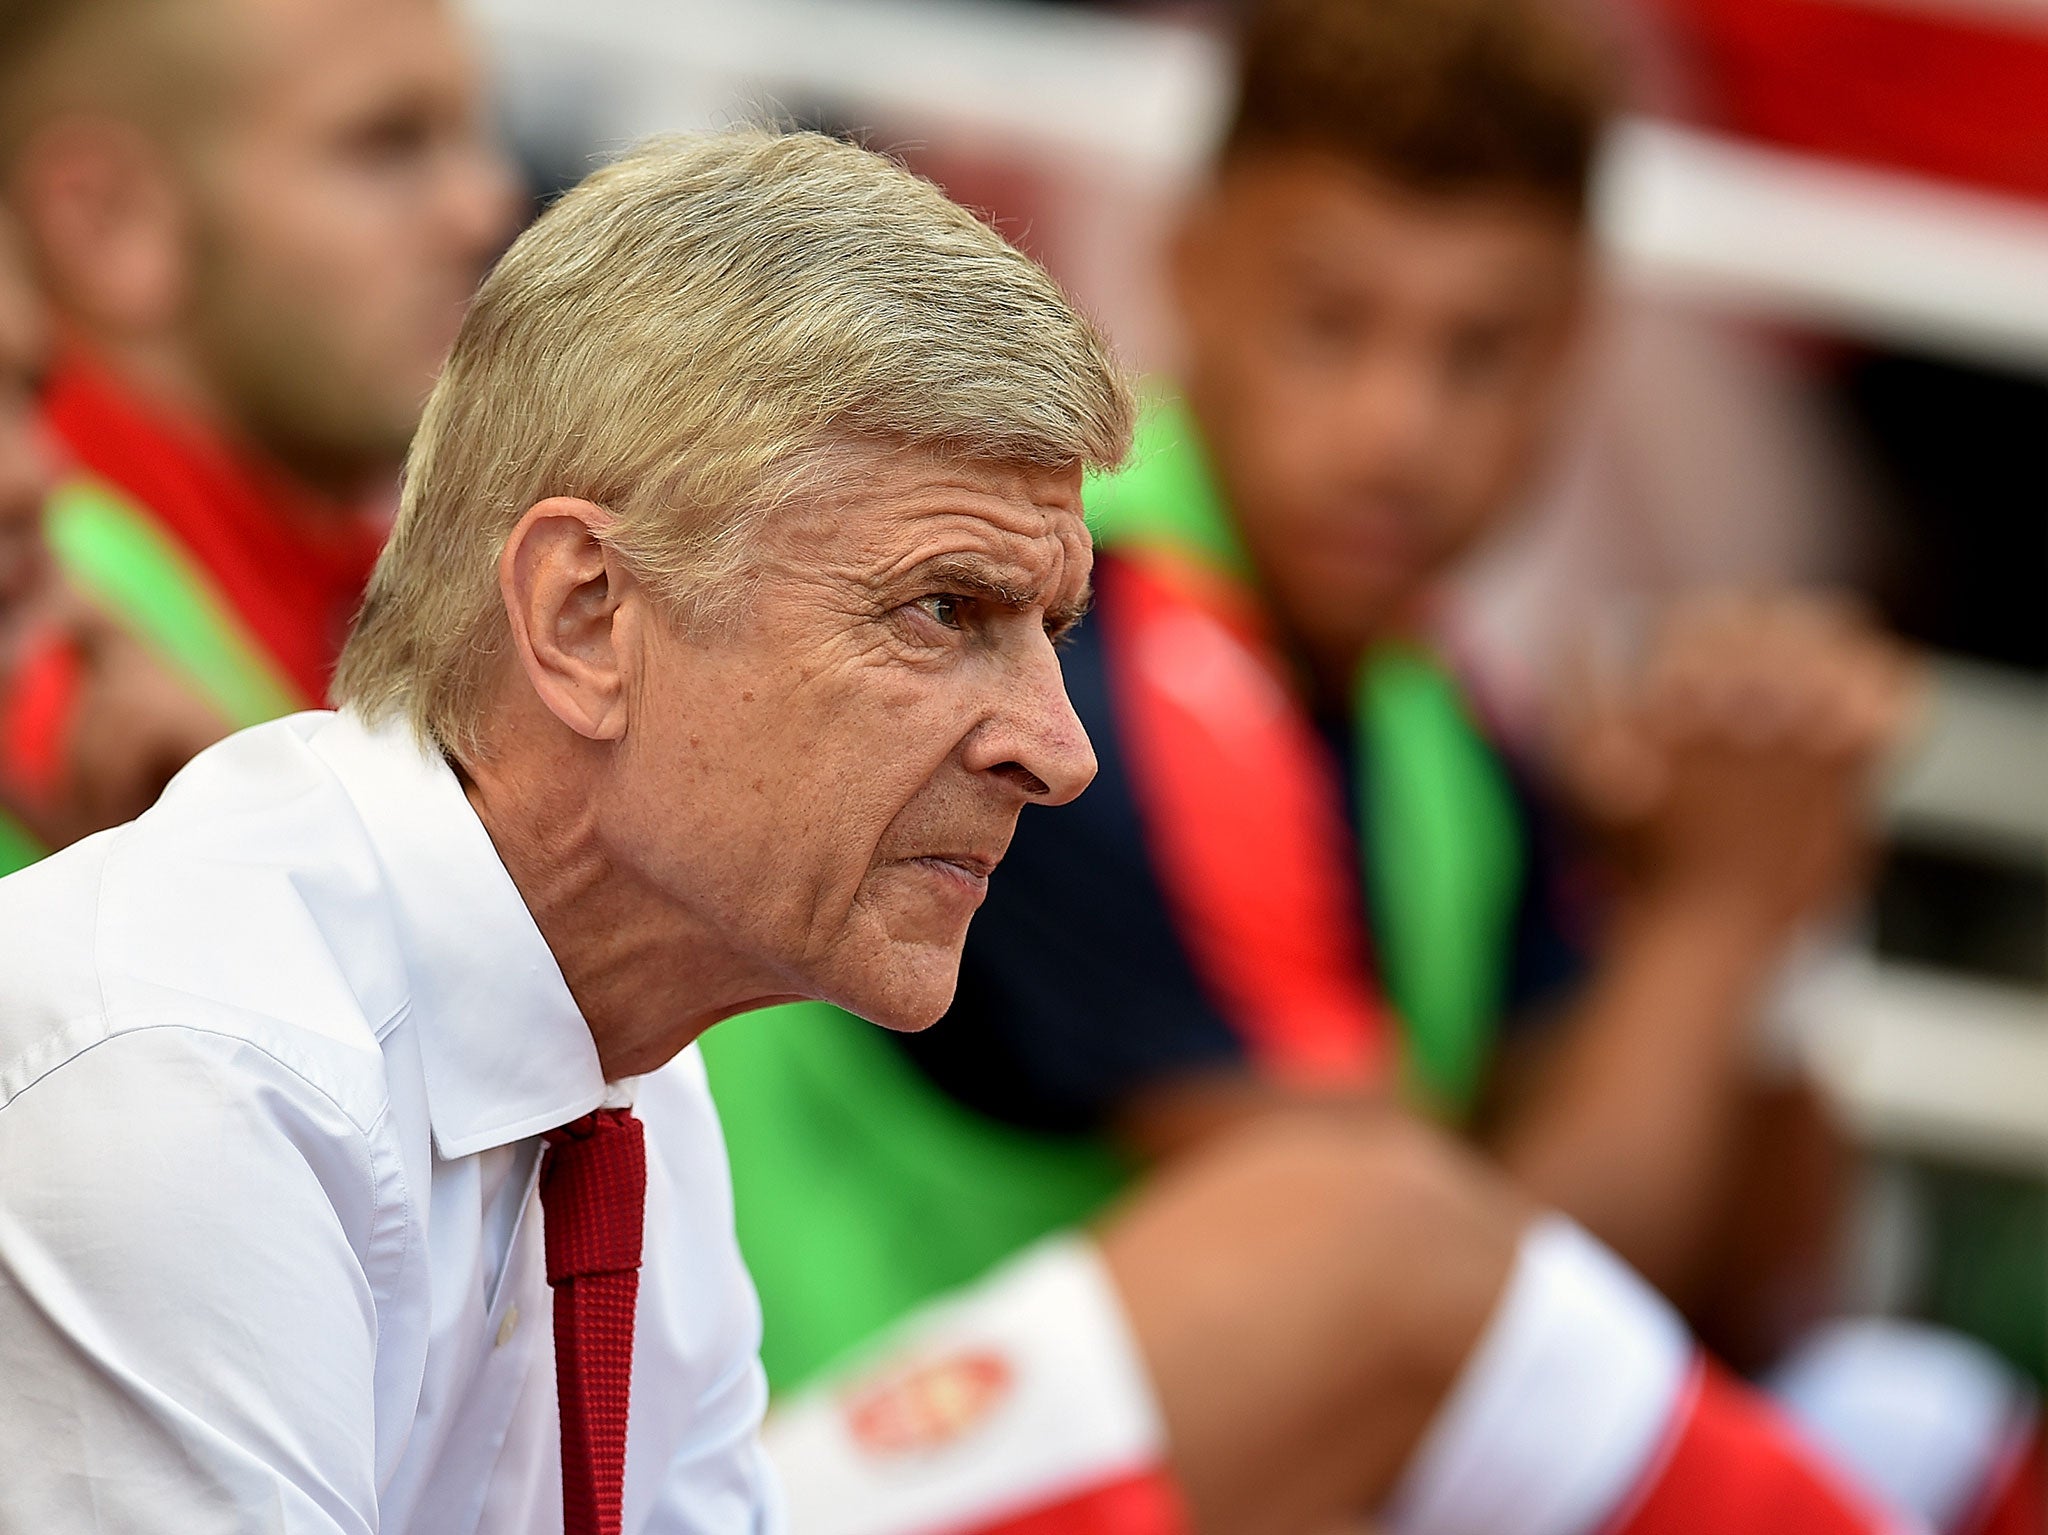 Arsene Wenger's announcement will please fans who have grown increasingly frustrated in recent weeks by Arsenal's lack of transfers